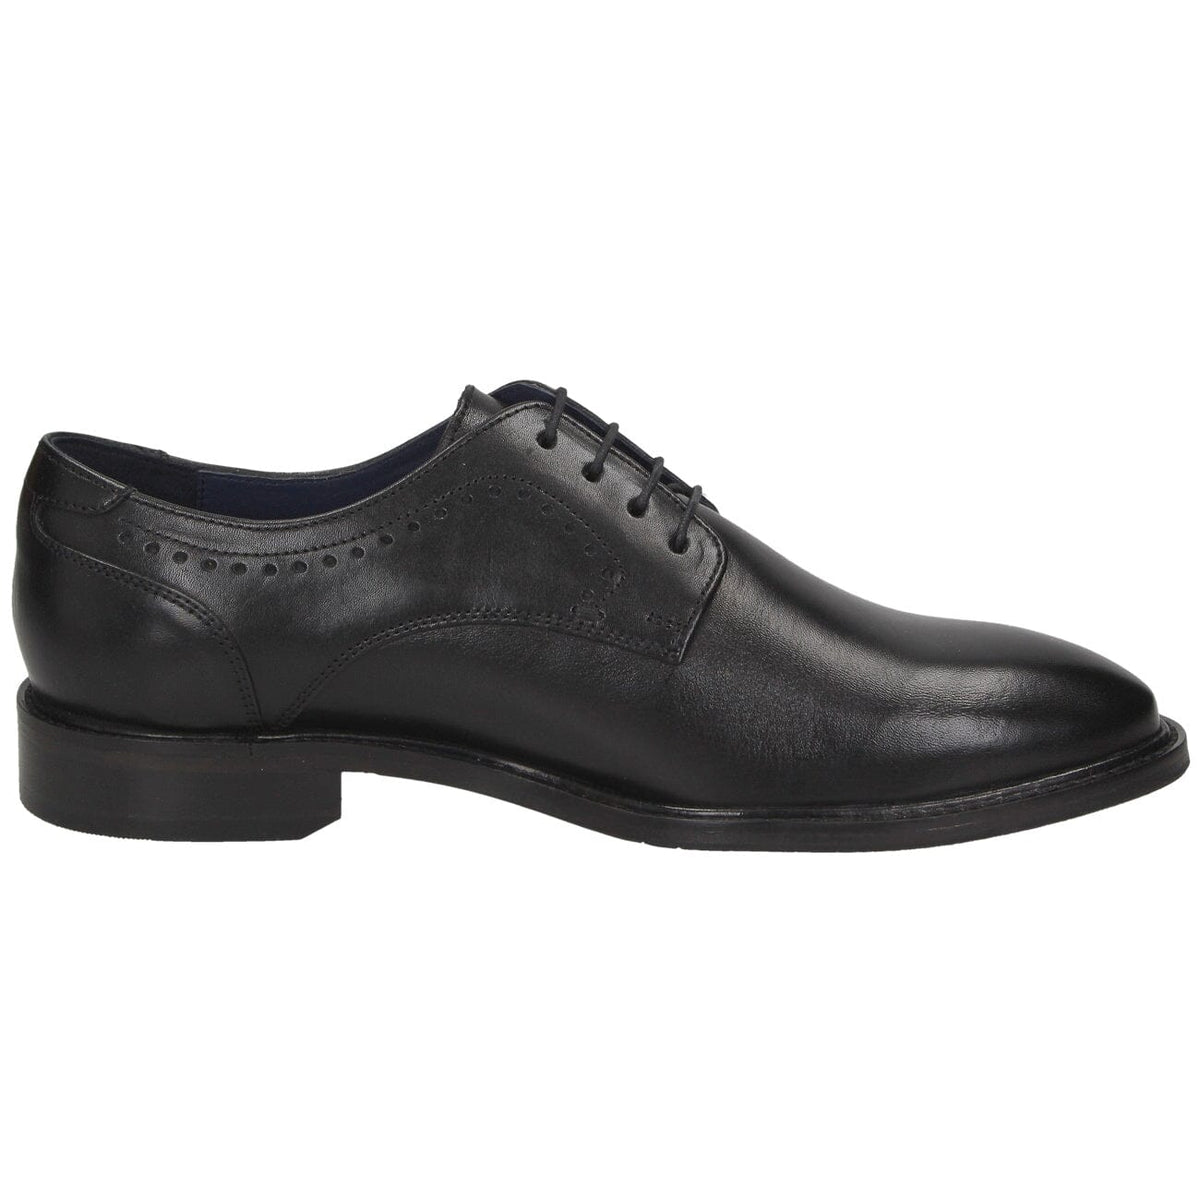 Sioux, GERIONDO, Shoe, Leather, Schwarz Shoes Sioux 